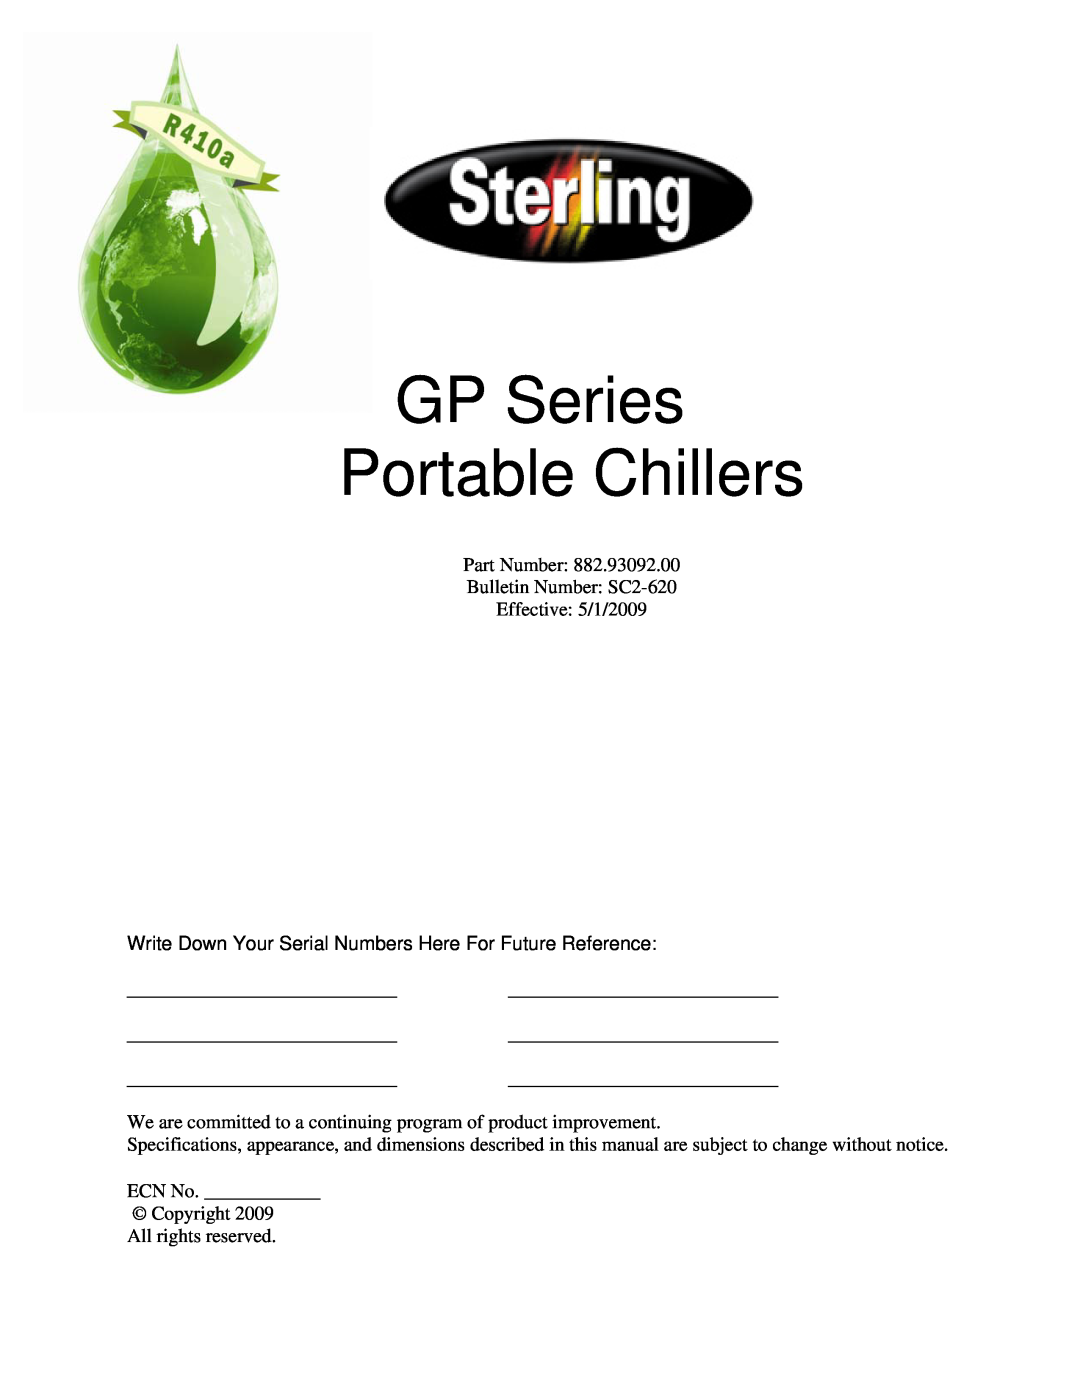 Sterling specifications GP Series Portable Chillers, Part Number Bulletin Number SC2-620 Effective 5/1/2009 